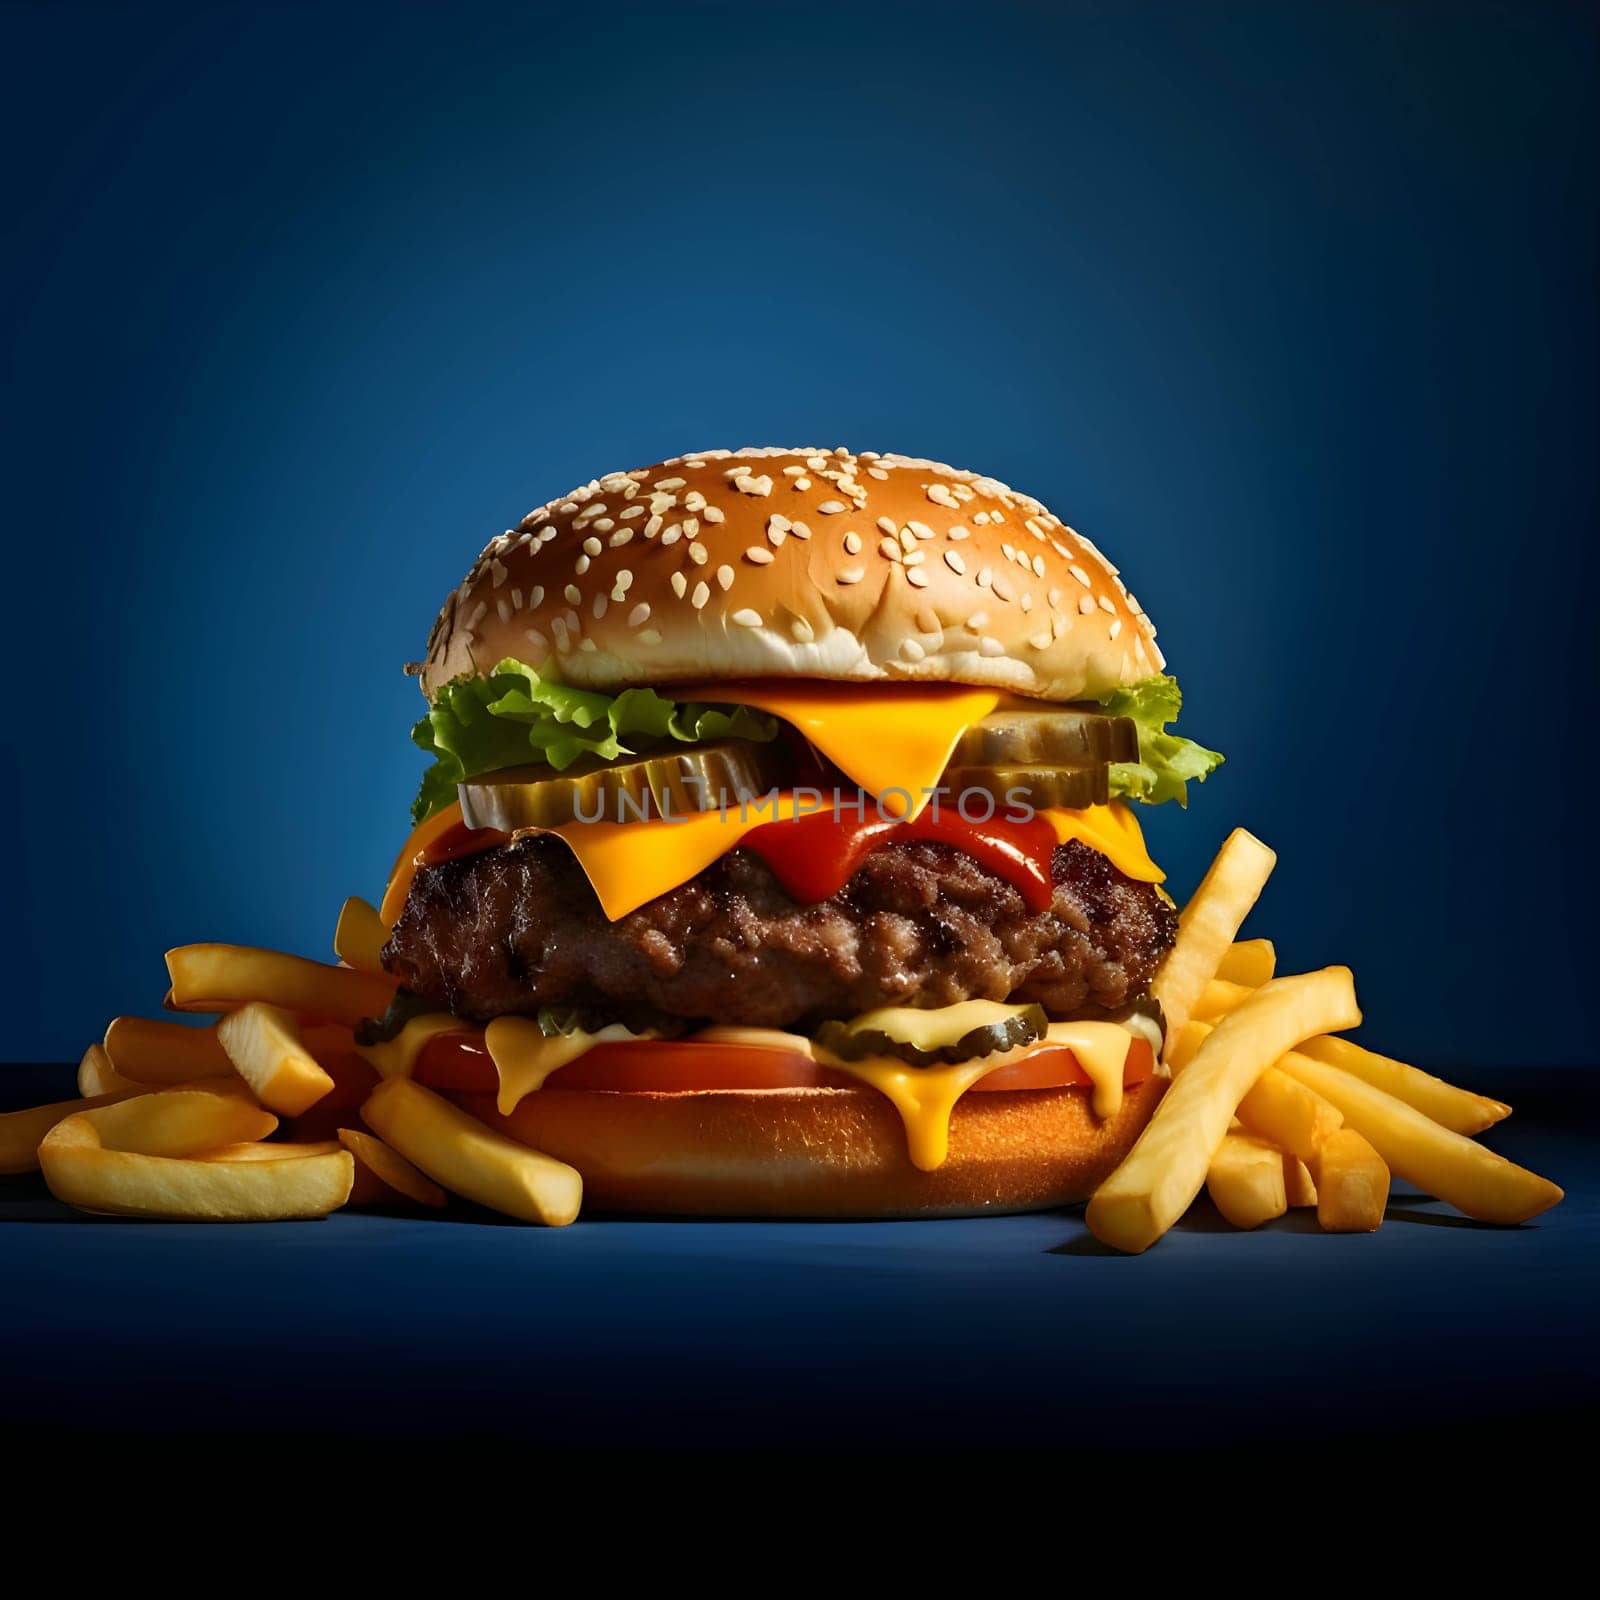 A mouthwatering hamburger with melted cheese, flavorful sauce, tangy pickle, and crispy fries, presented on a vibrant blue background.